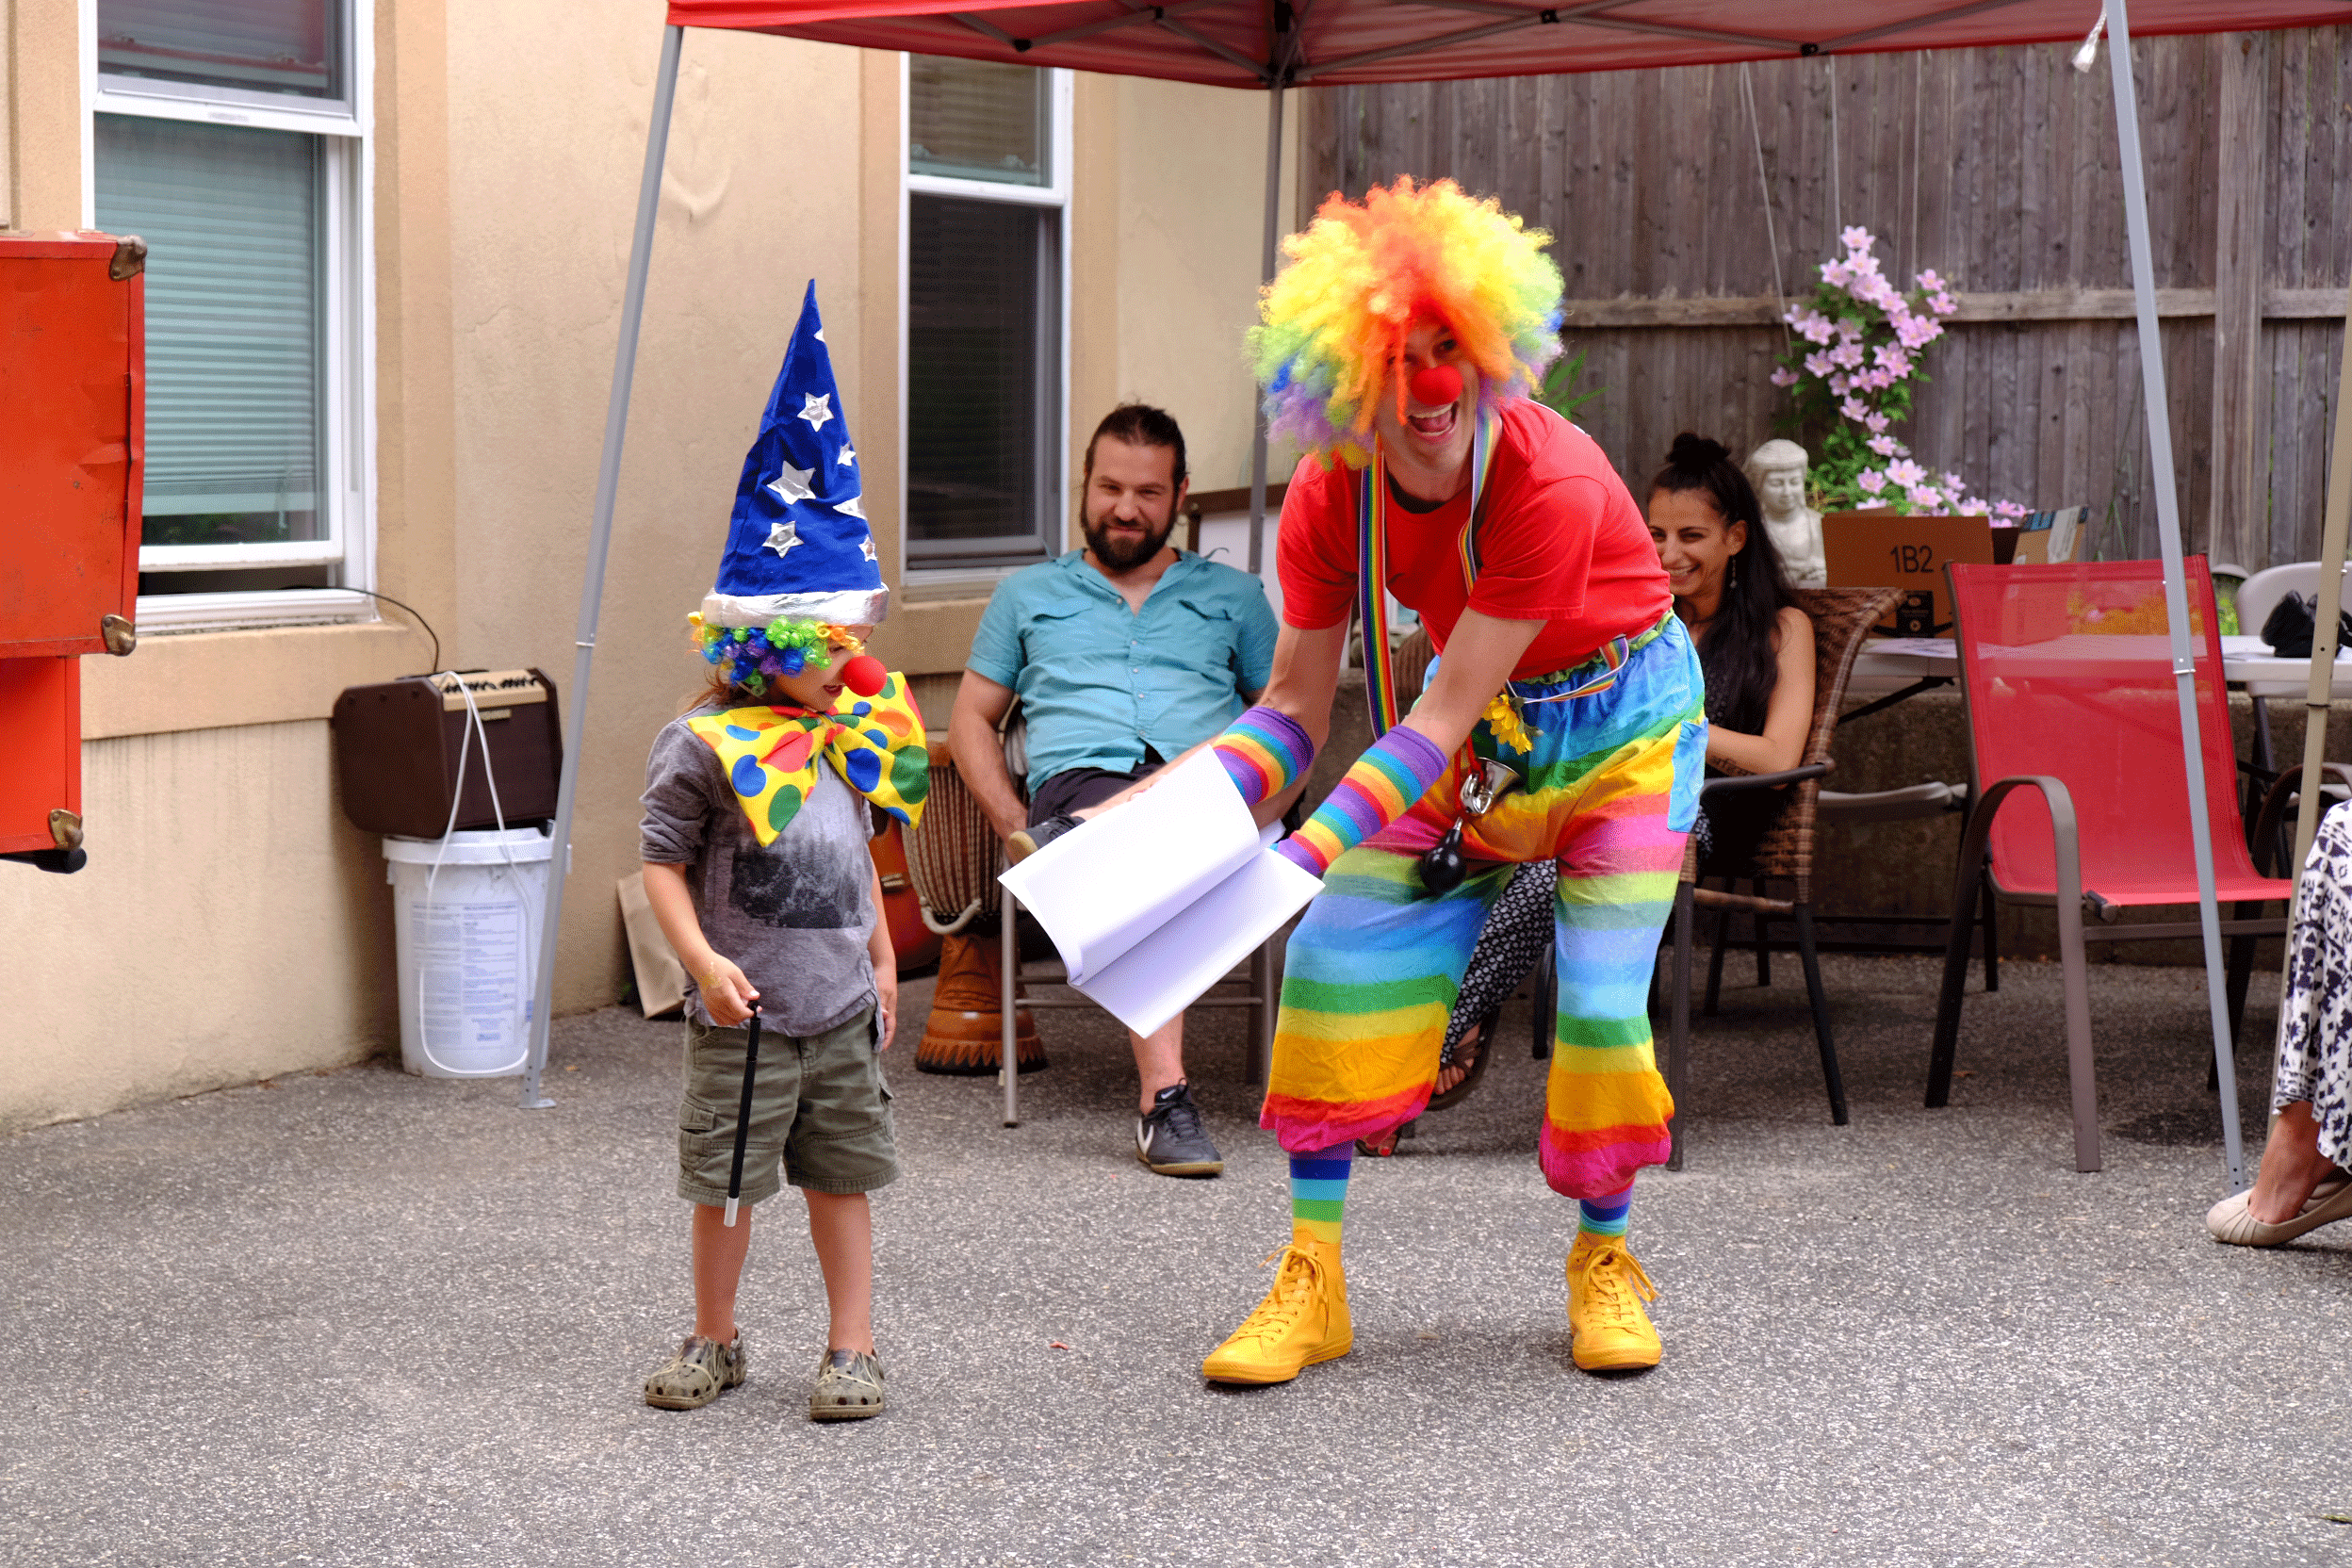 Brayden and Bubbles the Clown